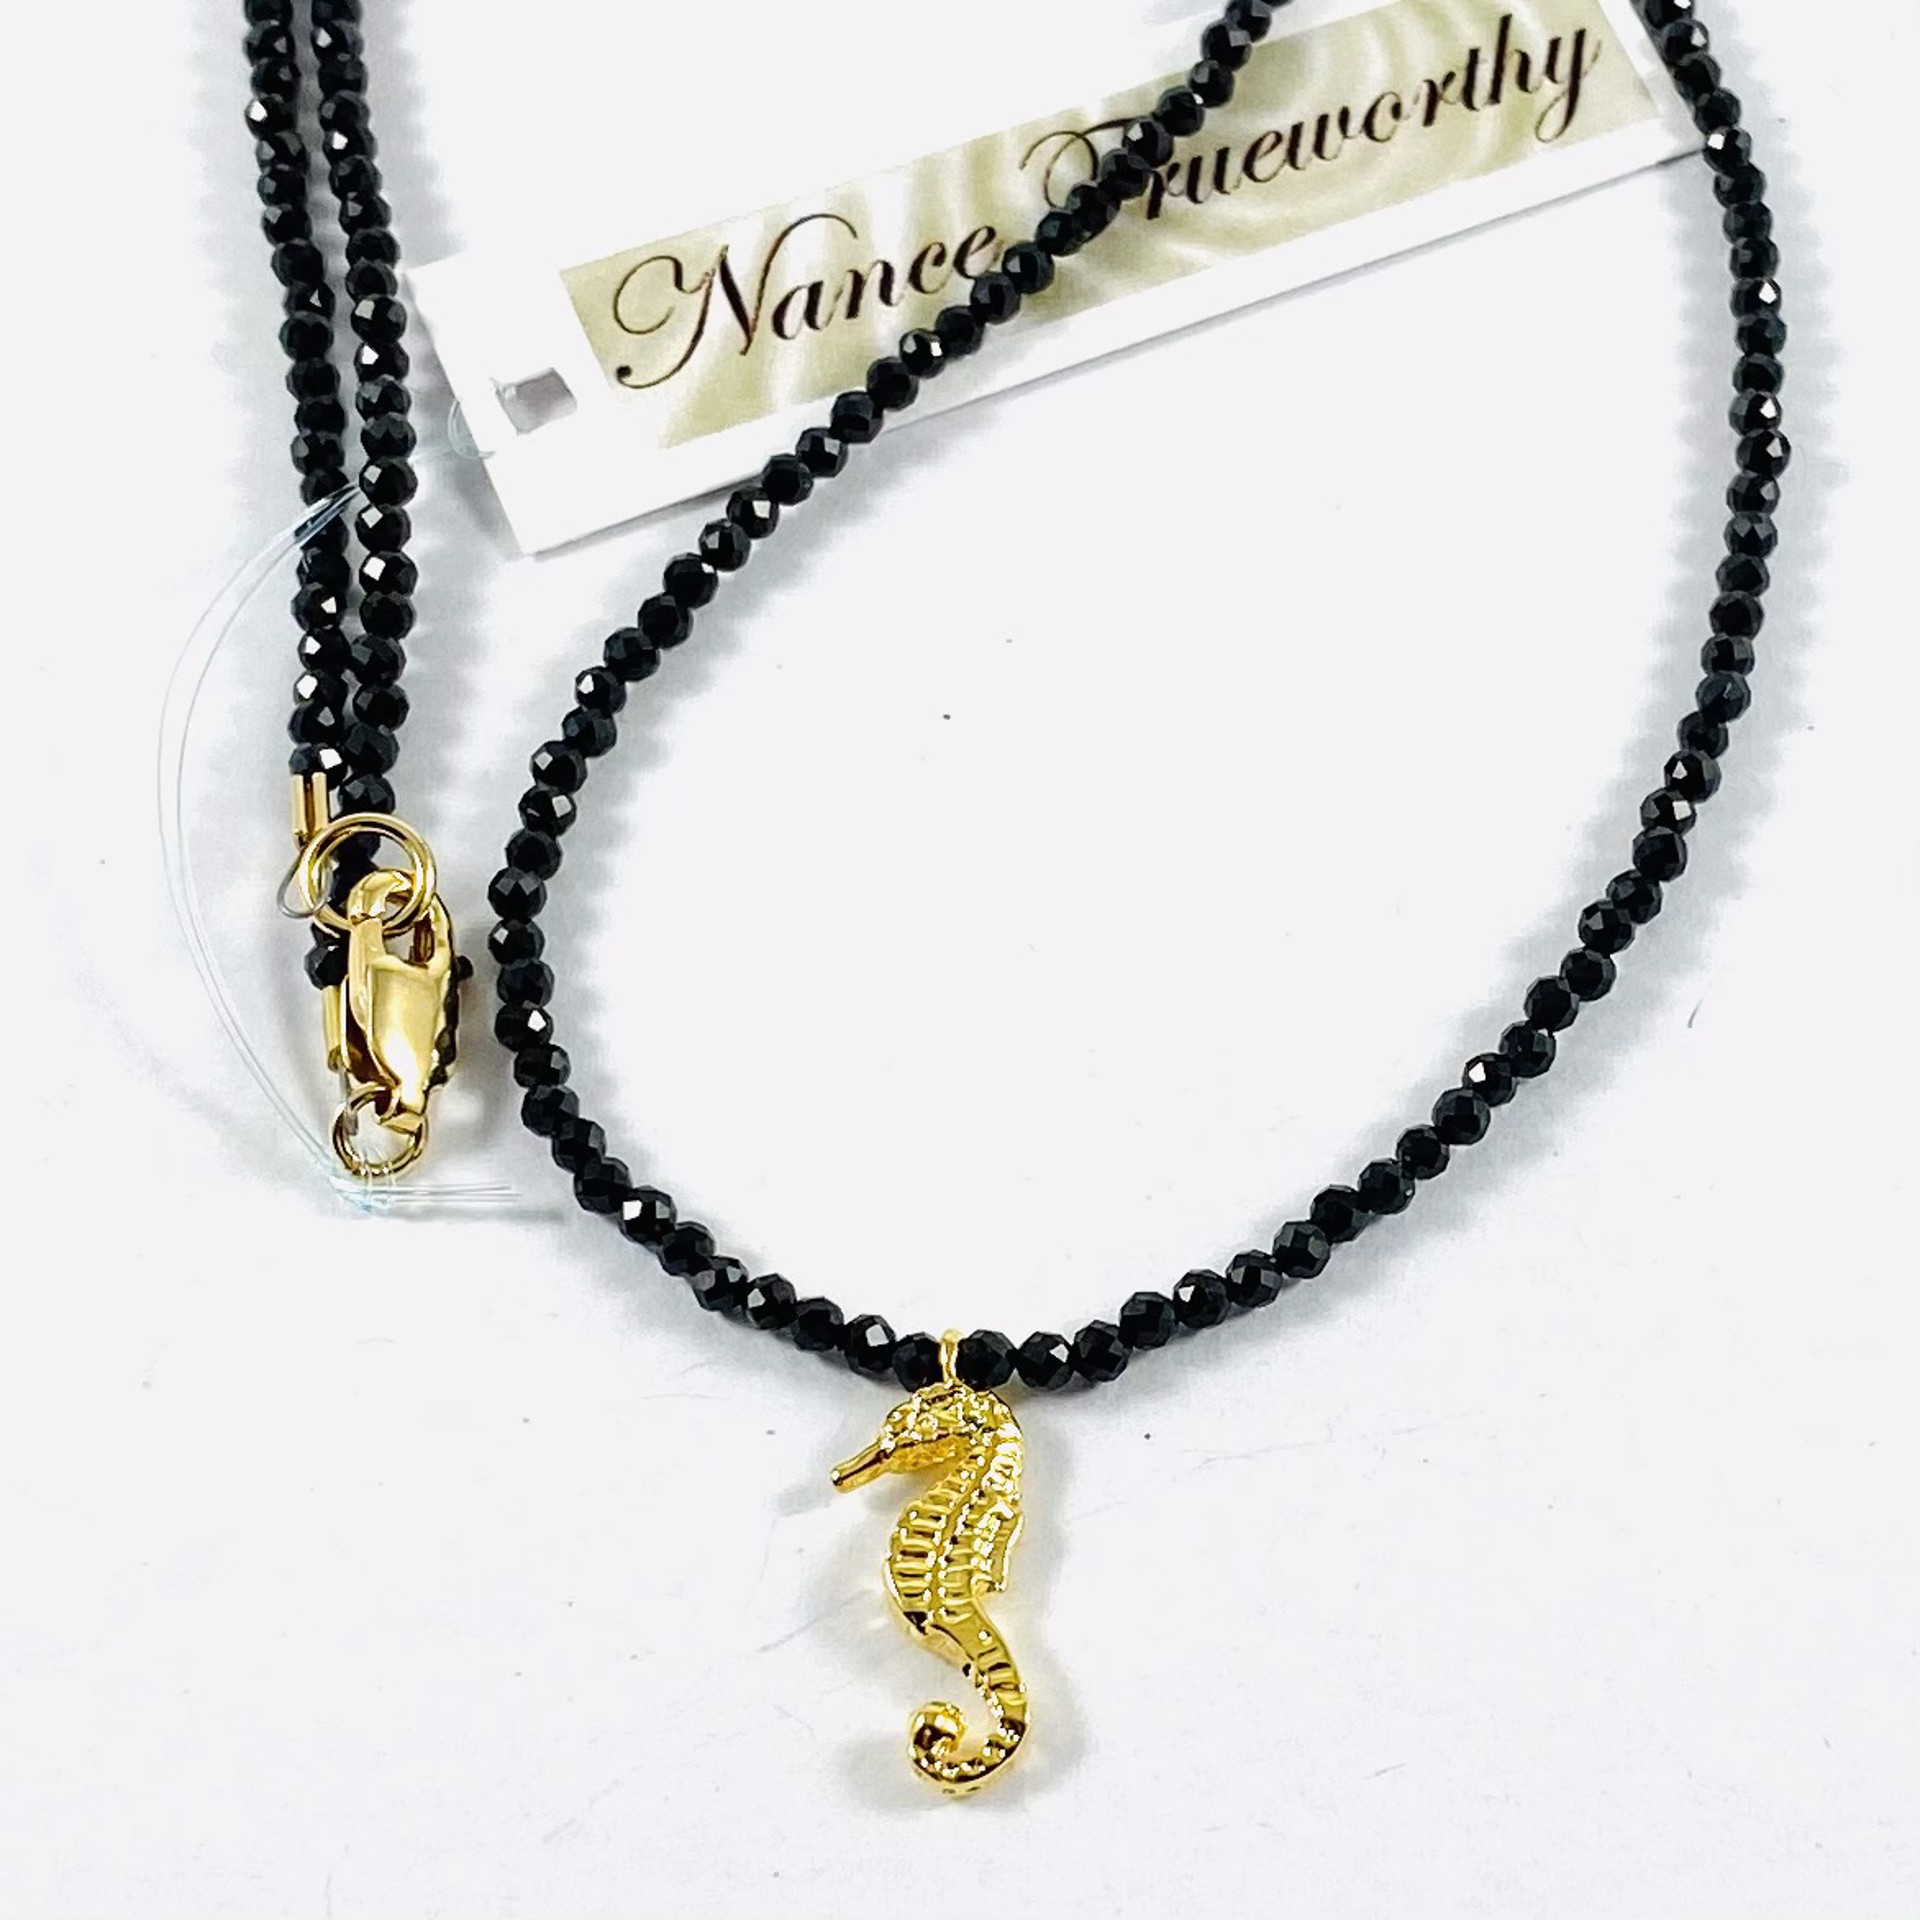 NT21-32 Black Faceted Spinel 16"Necklace Tiny Vermeil Seahorse Pendant by Nance Trueworthy